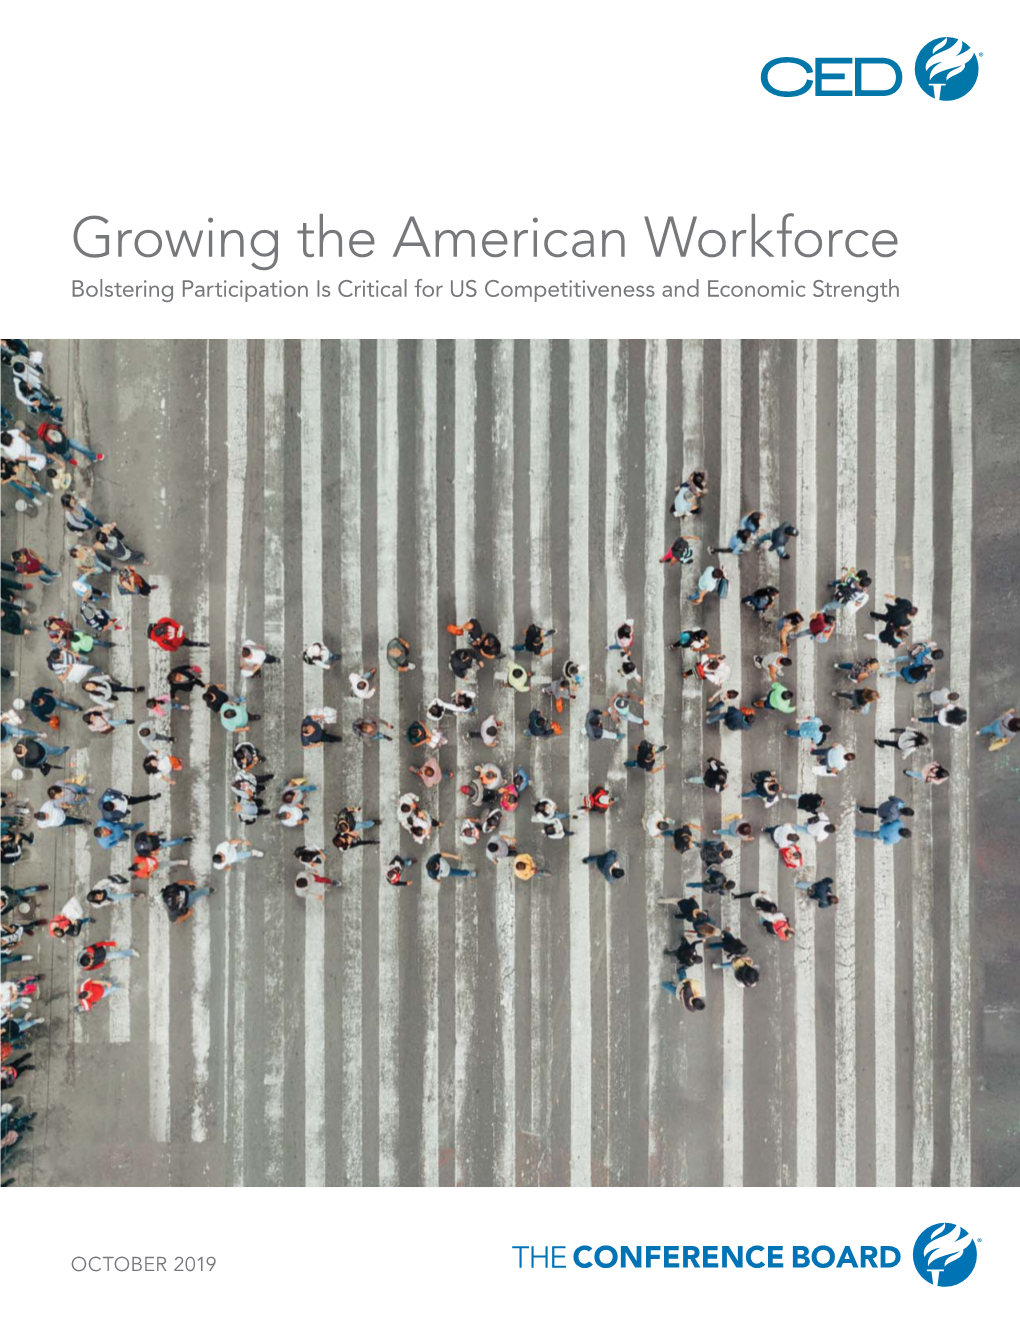 Growing the American Workforce Bolstering Participation Is Critical for US Competitiveness and Economic Strength